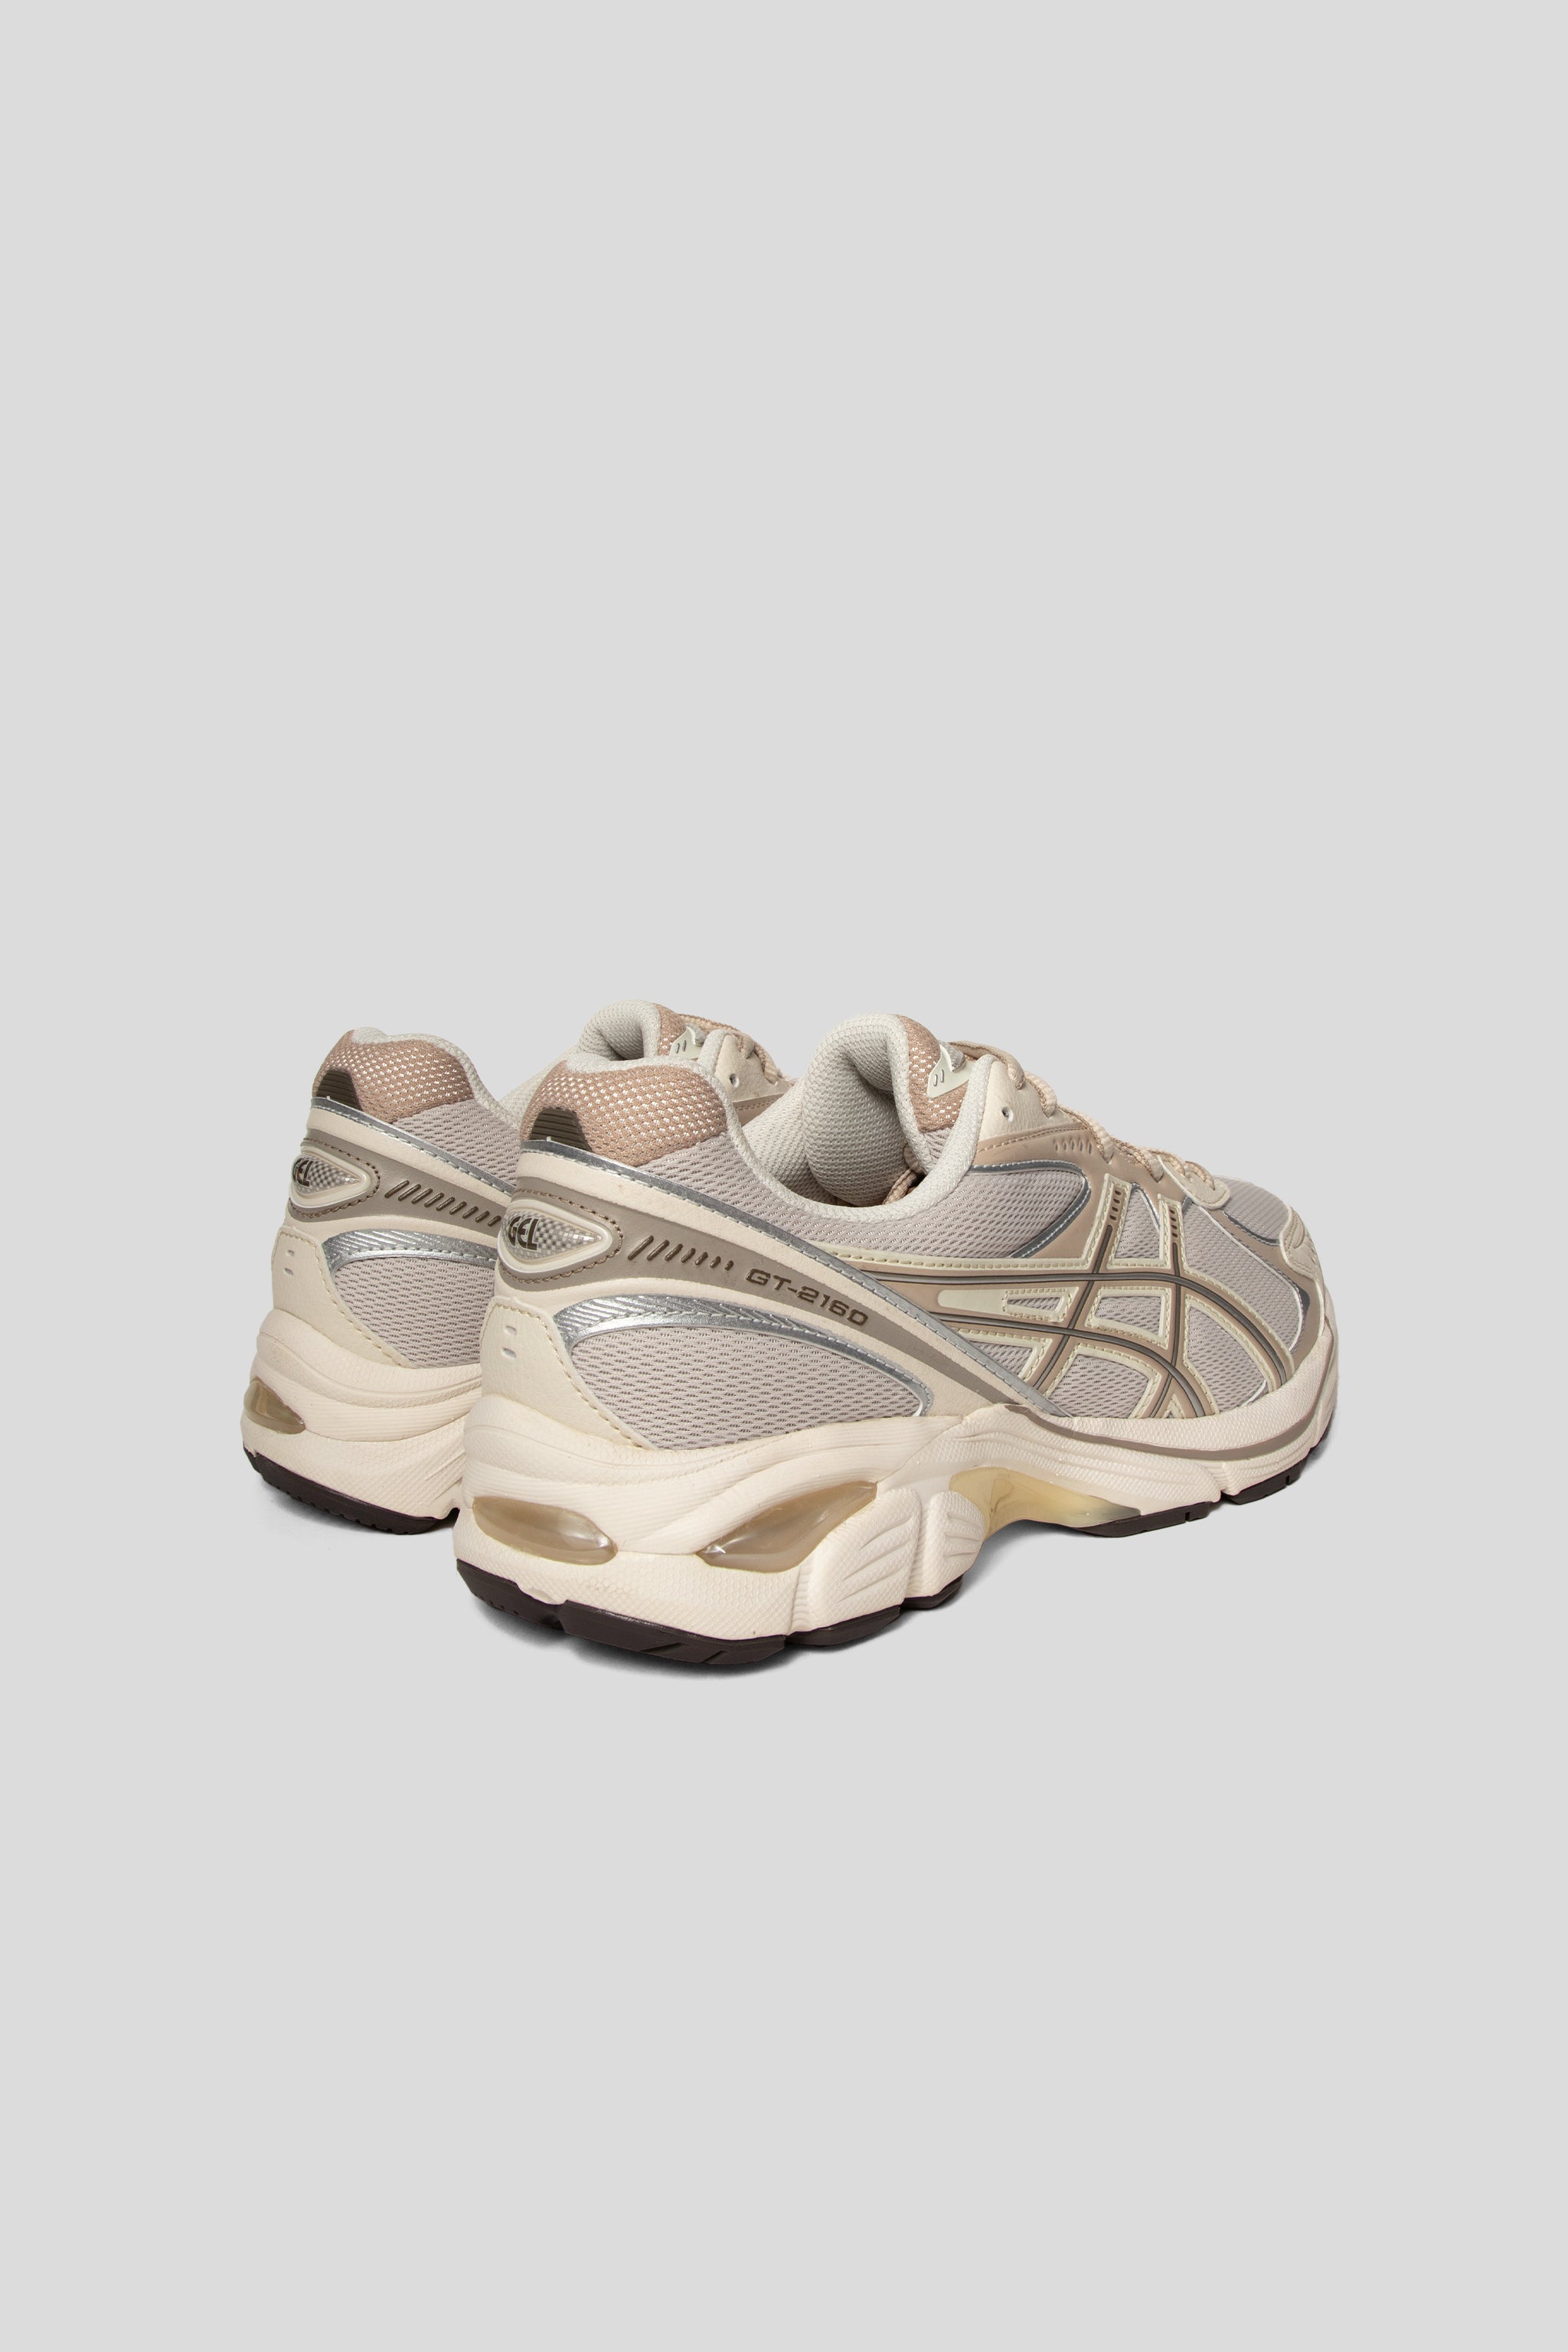 Asics GT-2160 - Oatmeal/Simply Taupe | Wallace Mercantile Shop